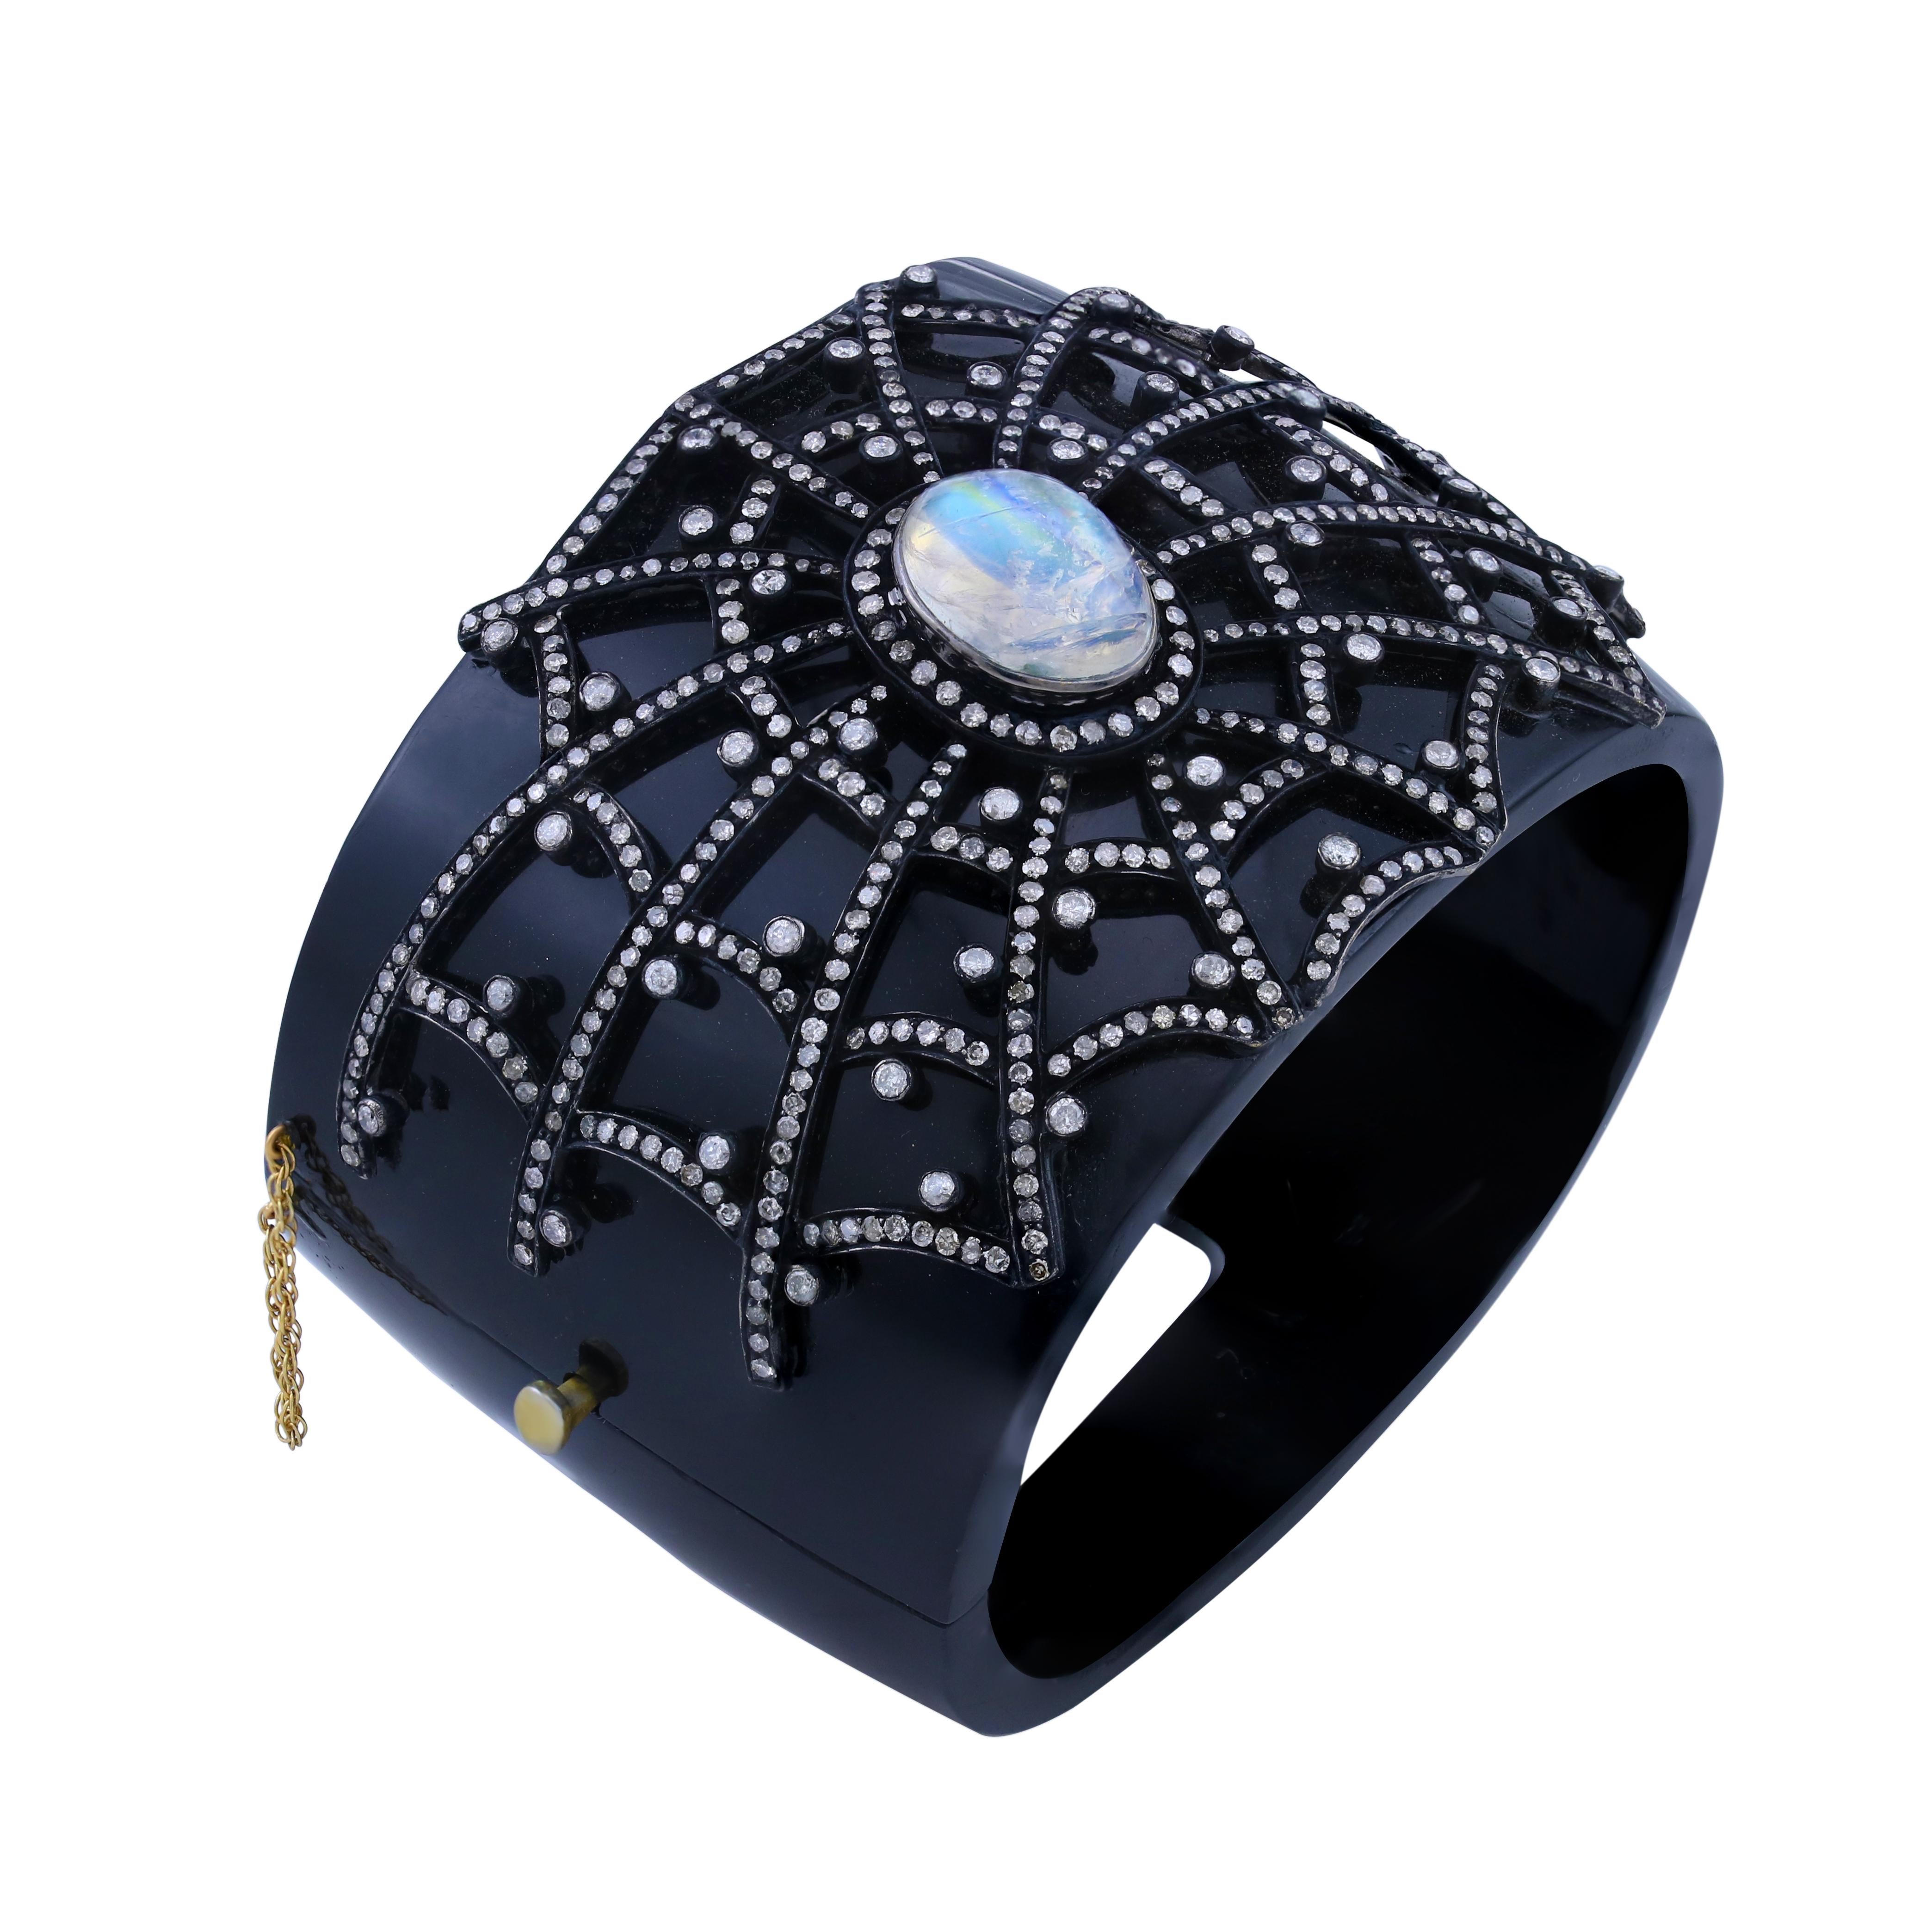 Introducing our stunning Bangle with Black Onyx, Rainbow Moonstone and Diamond Bangle in 14K/925 Silver! The body of this bangle is made of black onyx, with a beautiful oval rainbow moonstone in the center, surrounded by a spider web of diamonds.